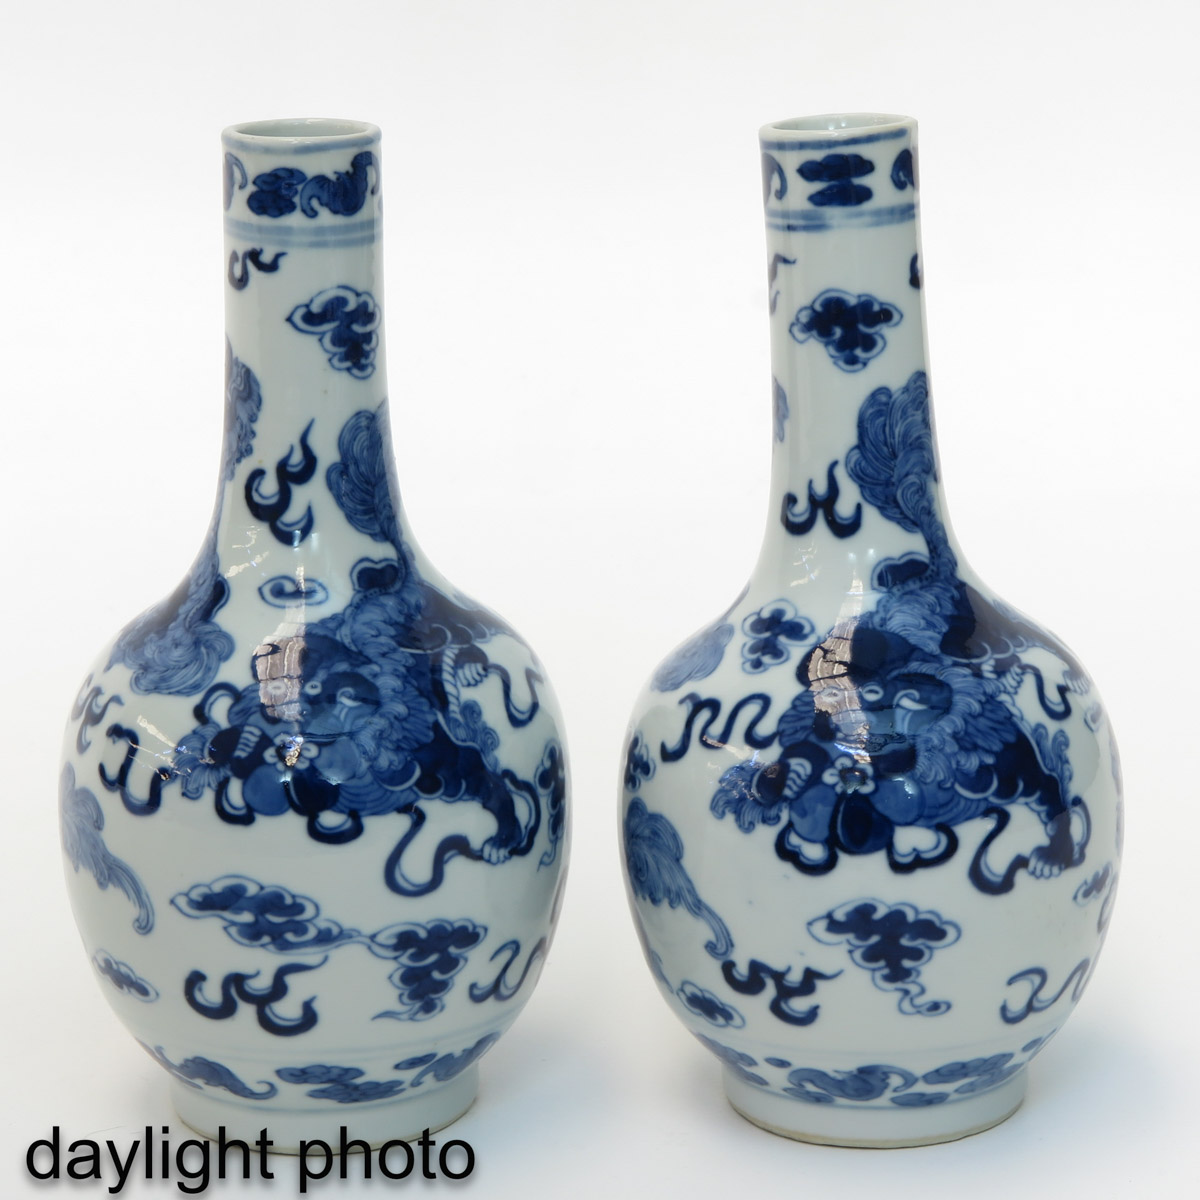 A Pair of Blue and White Bottle Vases - Image 7 of 10